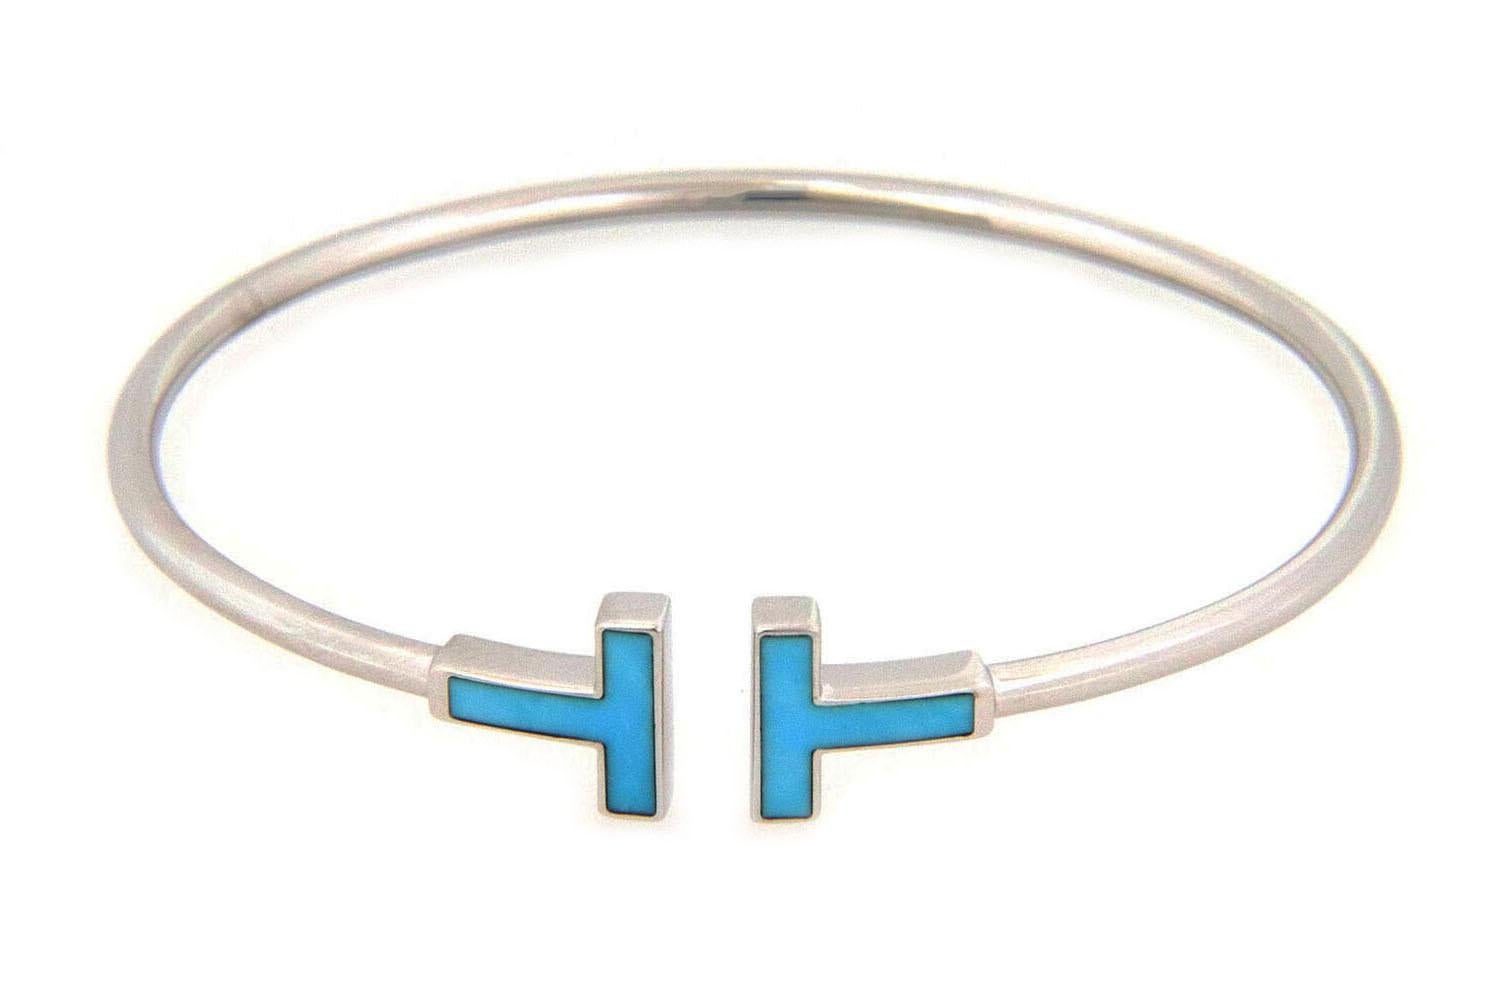 Tiffany T for Two, this charming and elegant authentic bracelet is by Tiffany & Co. from the Tiffany T Collection, it is crafted from 18k white gold with a fine polished finish, the band is in a 2mm thick wire style with the double end Ts inlaid